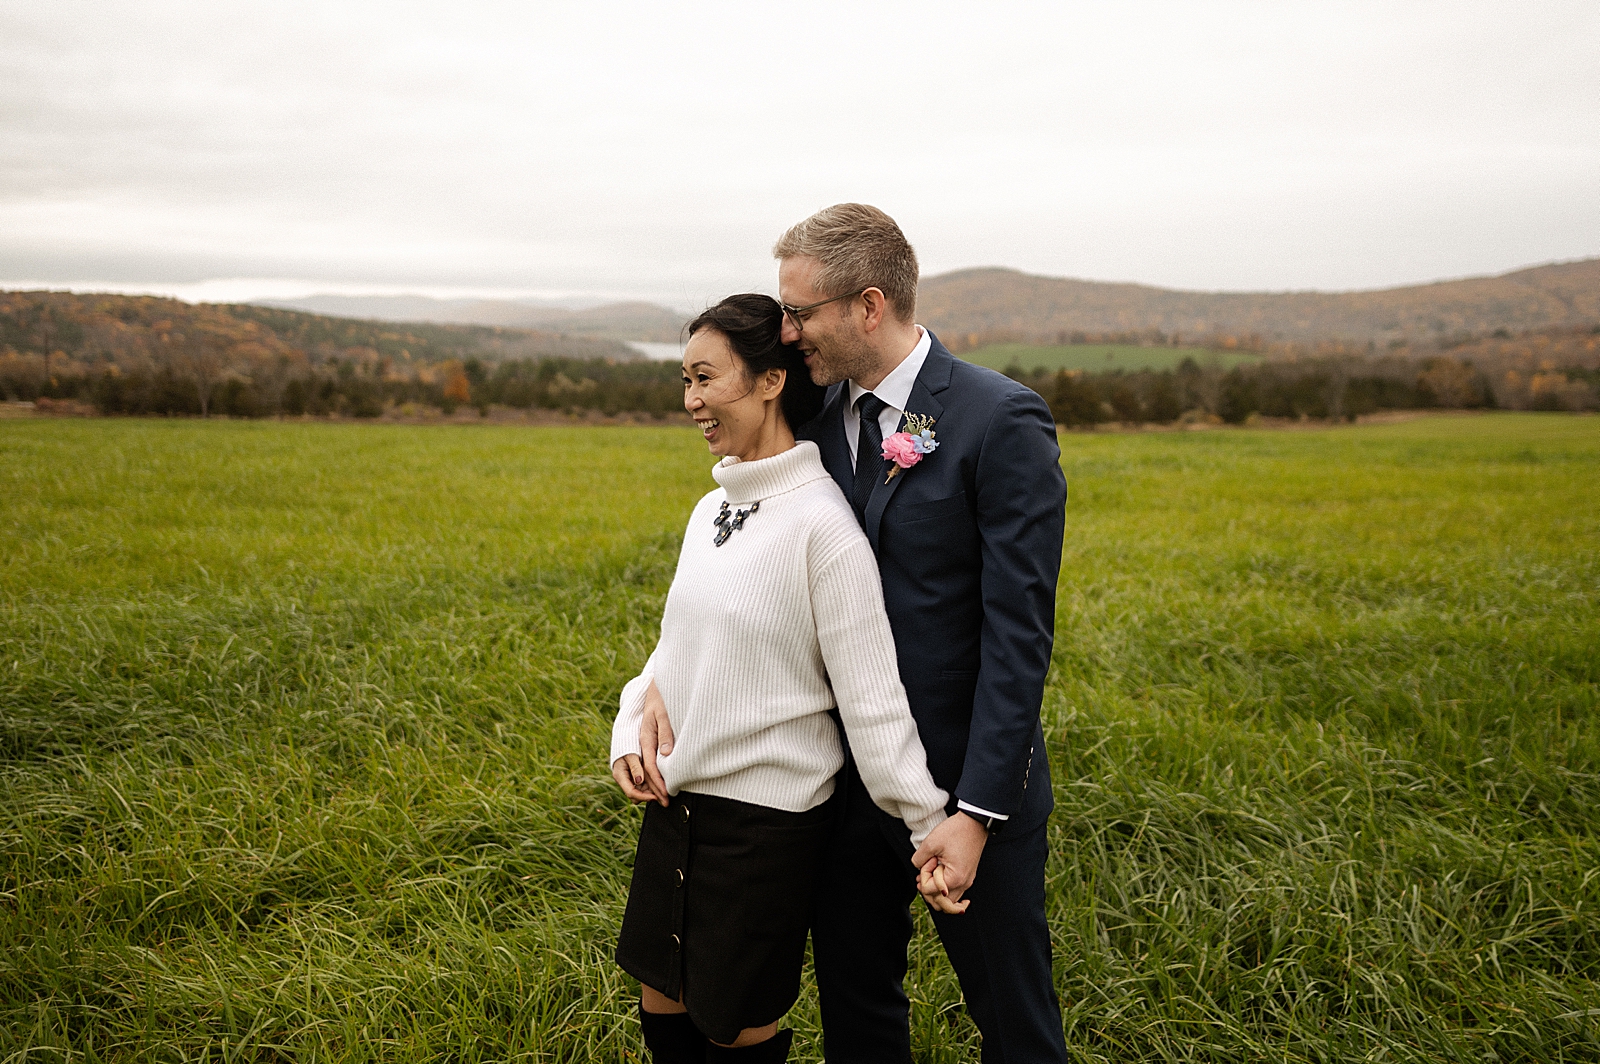 Groom holding Bride's hand from behind on grassy field